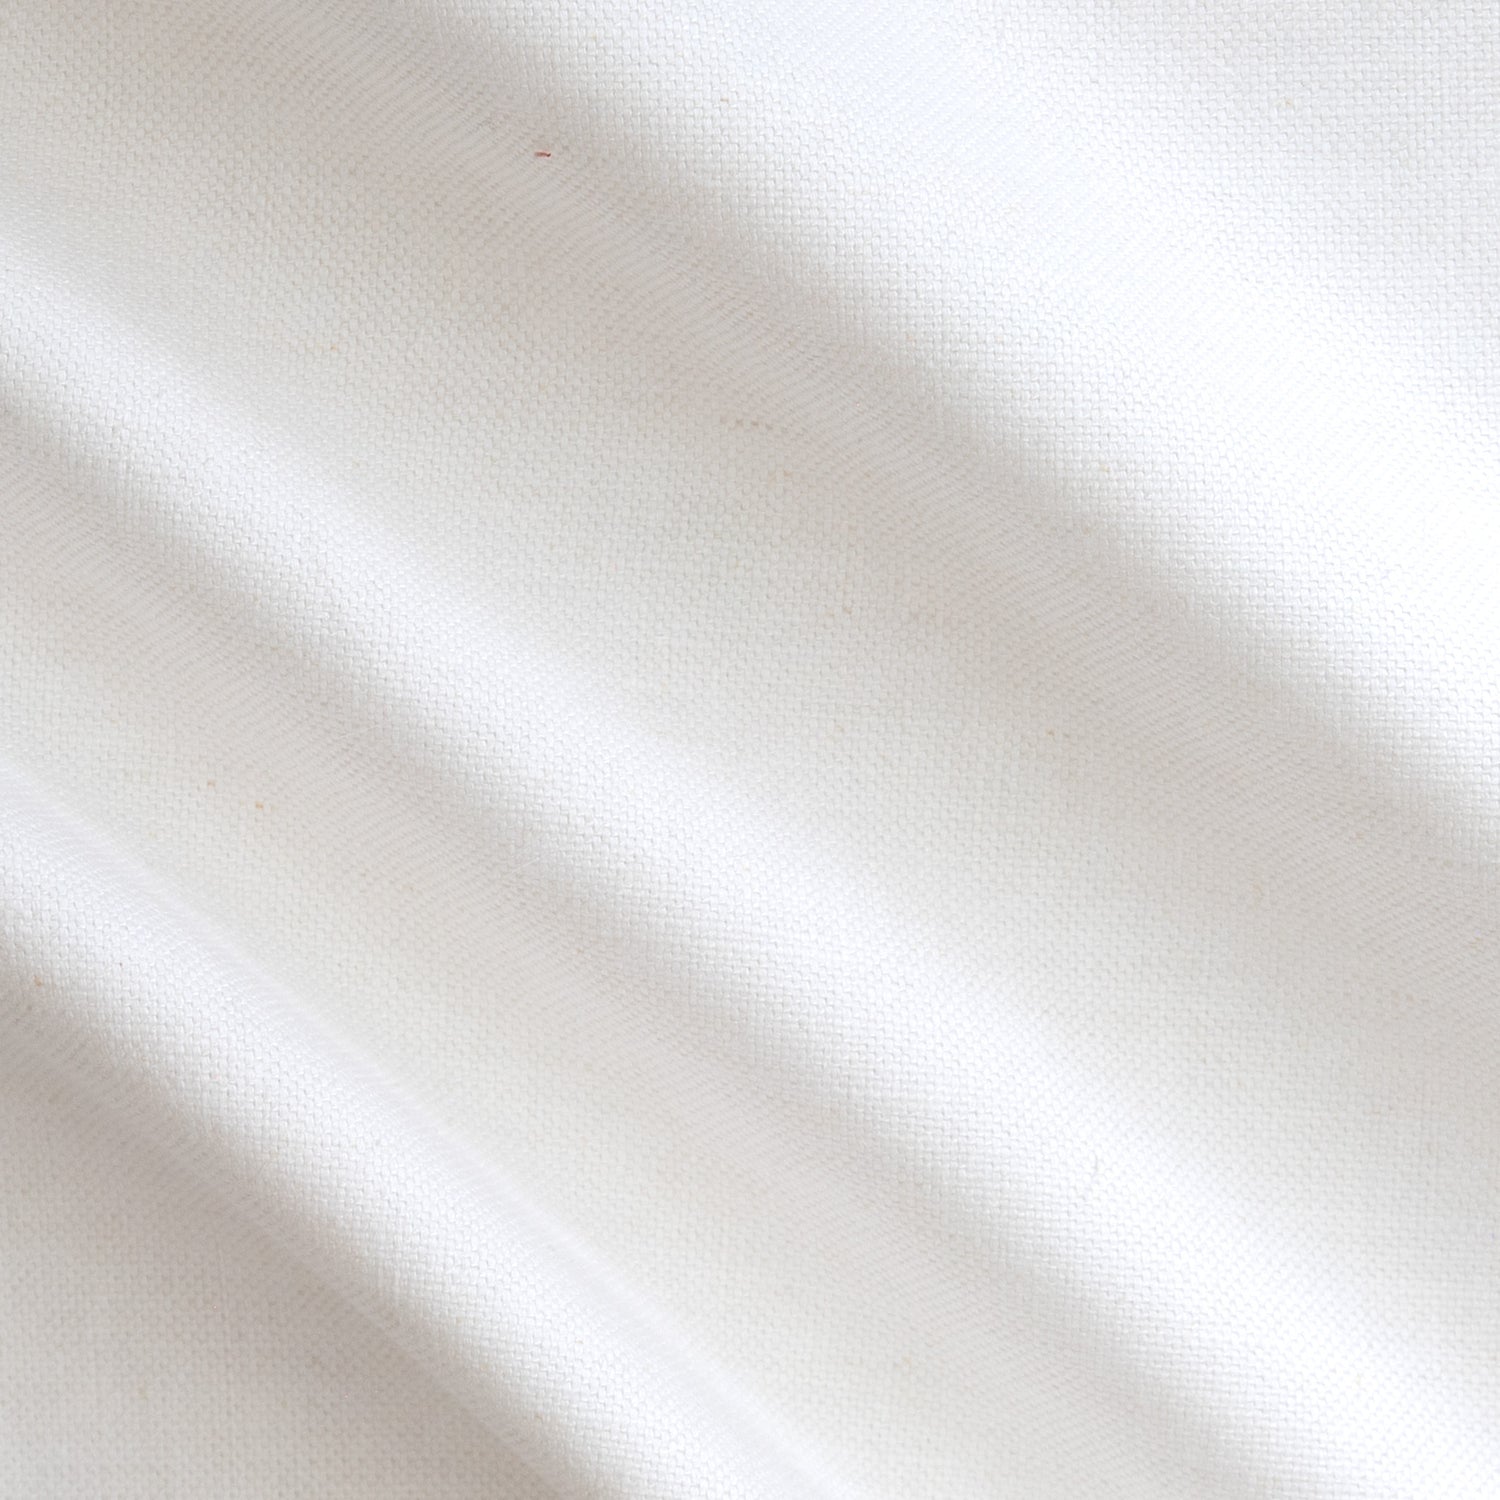 Natural White Linen Fabric Close-Up